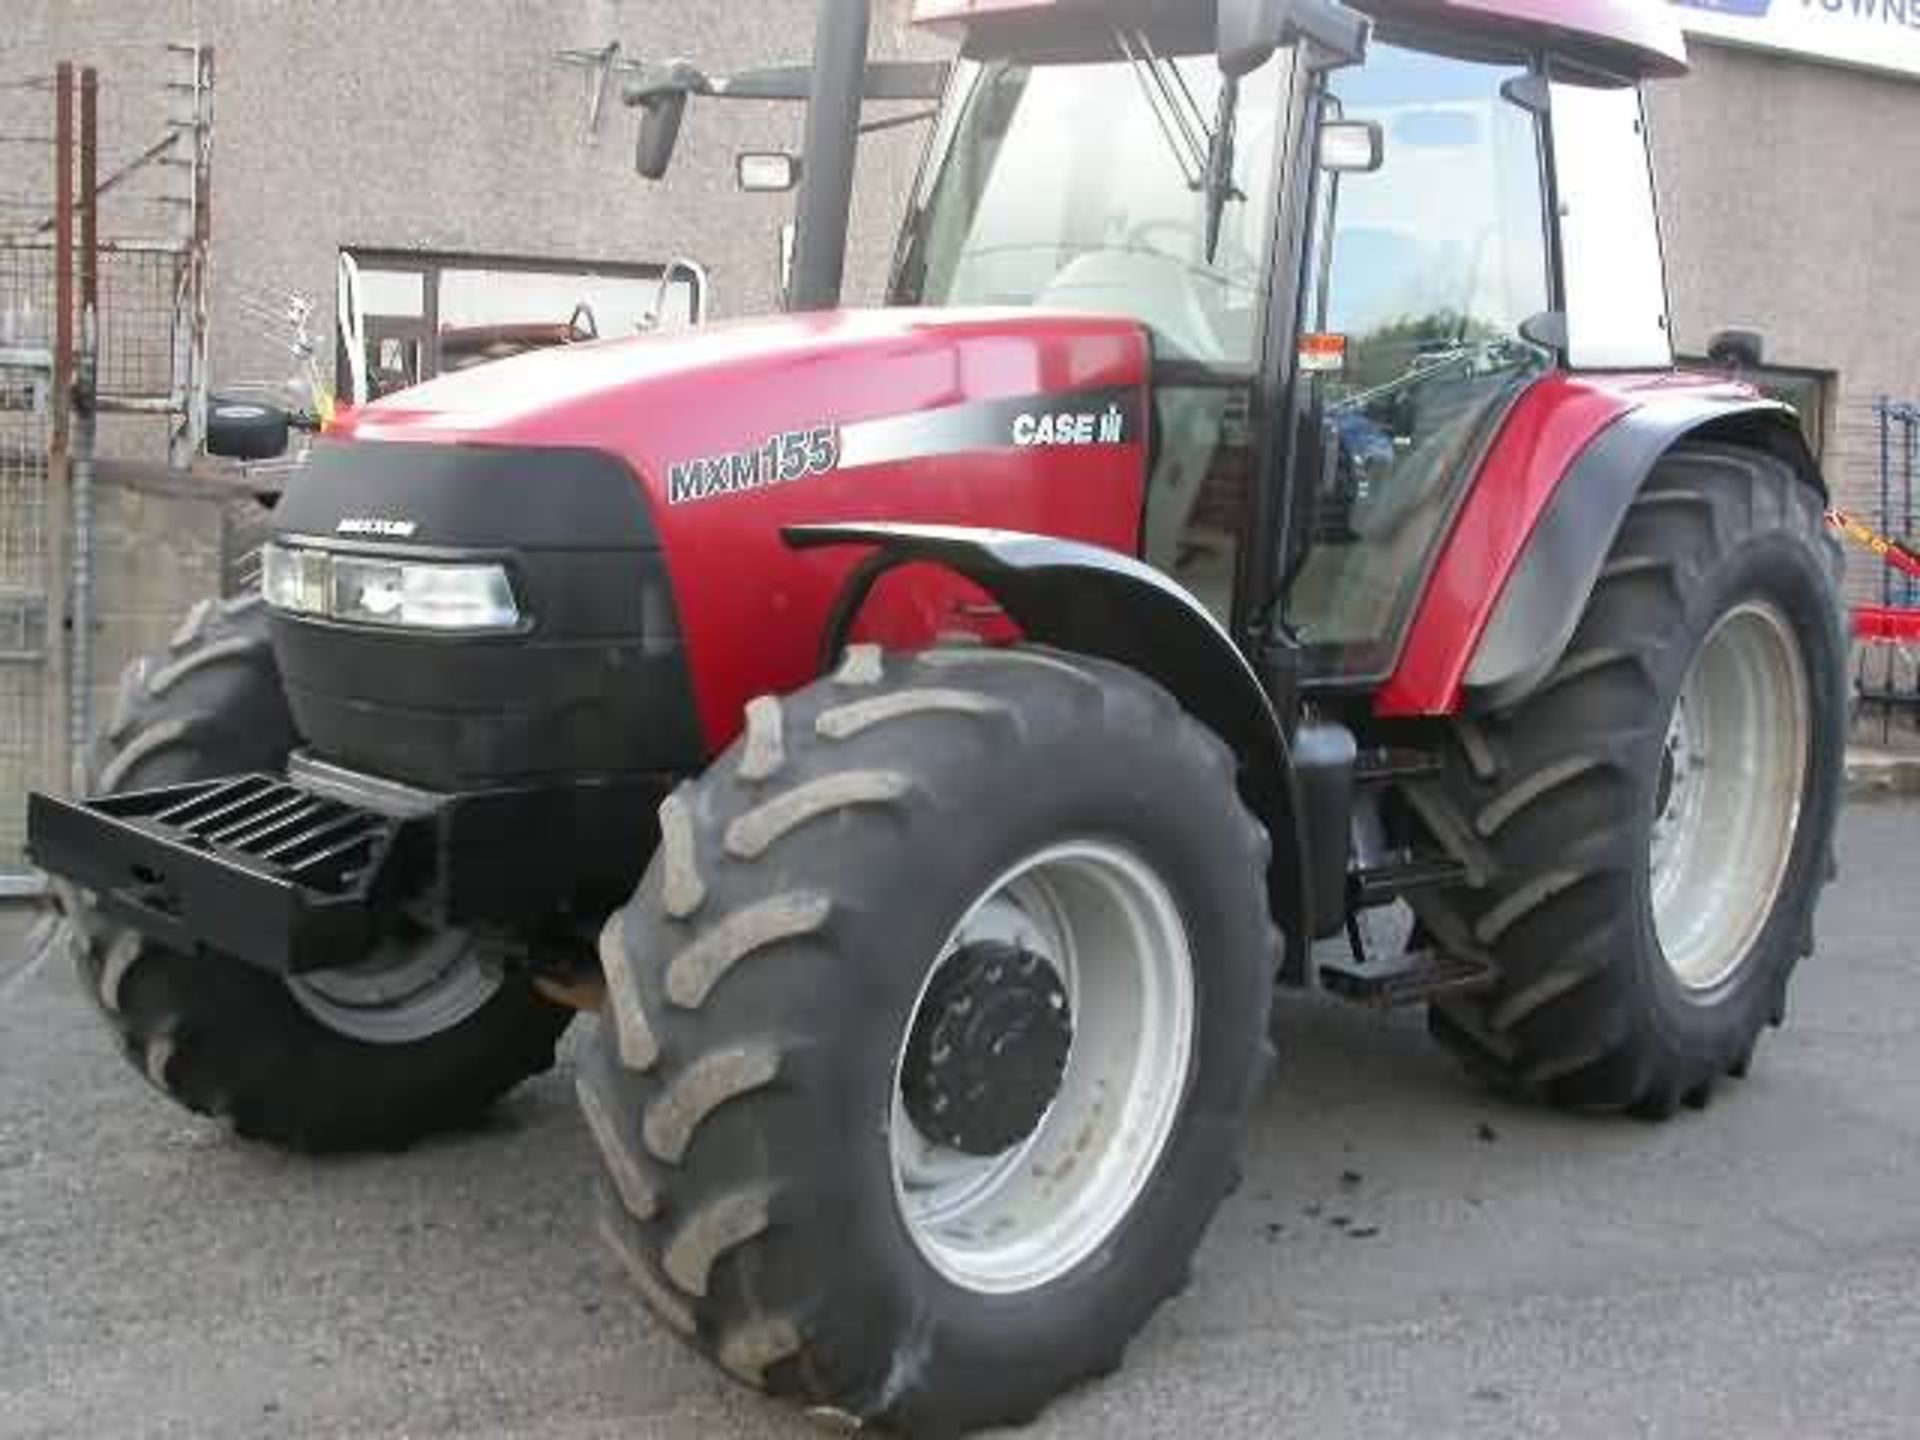 2003 Case MXM155 Tractor. V5 will be supplied